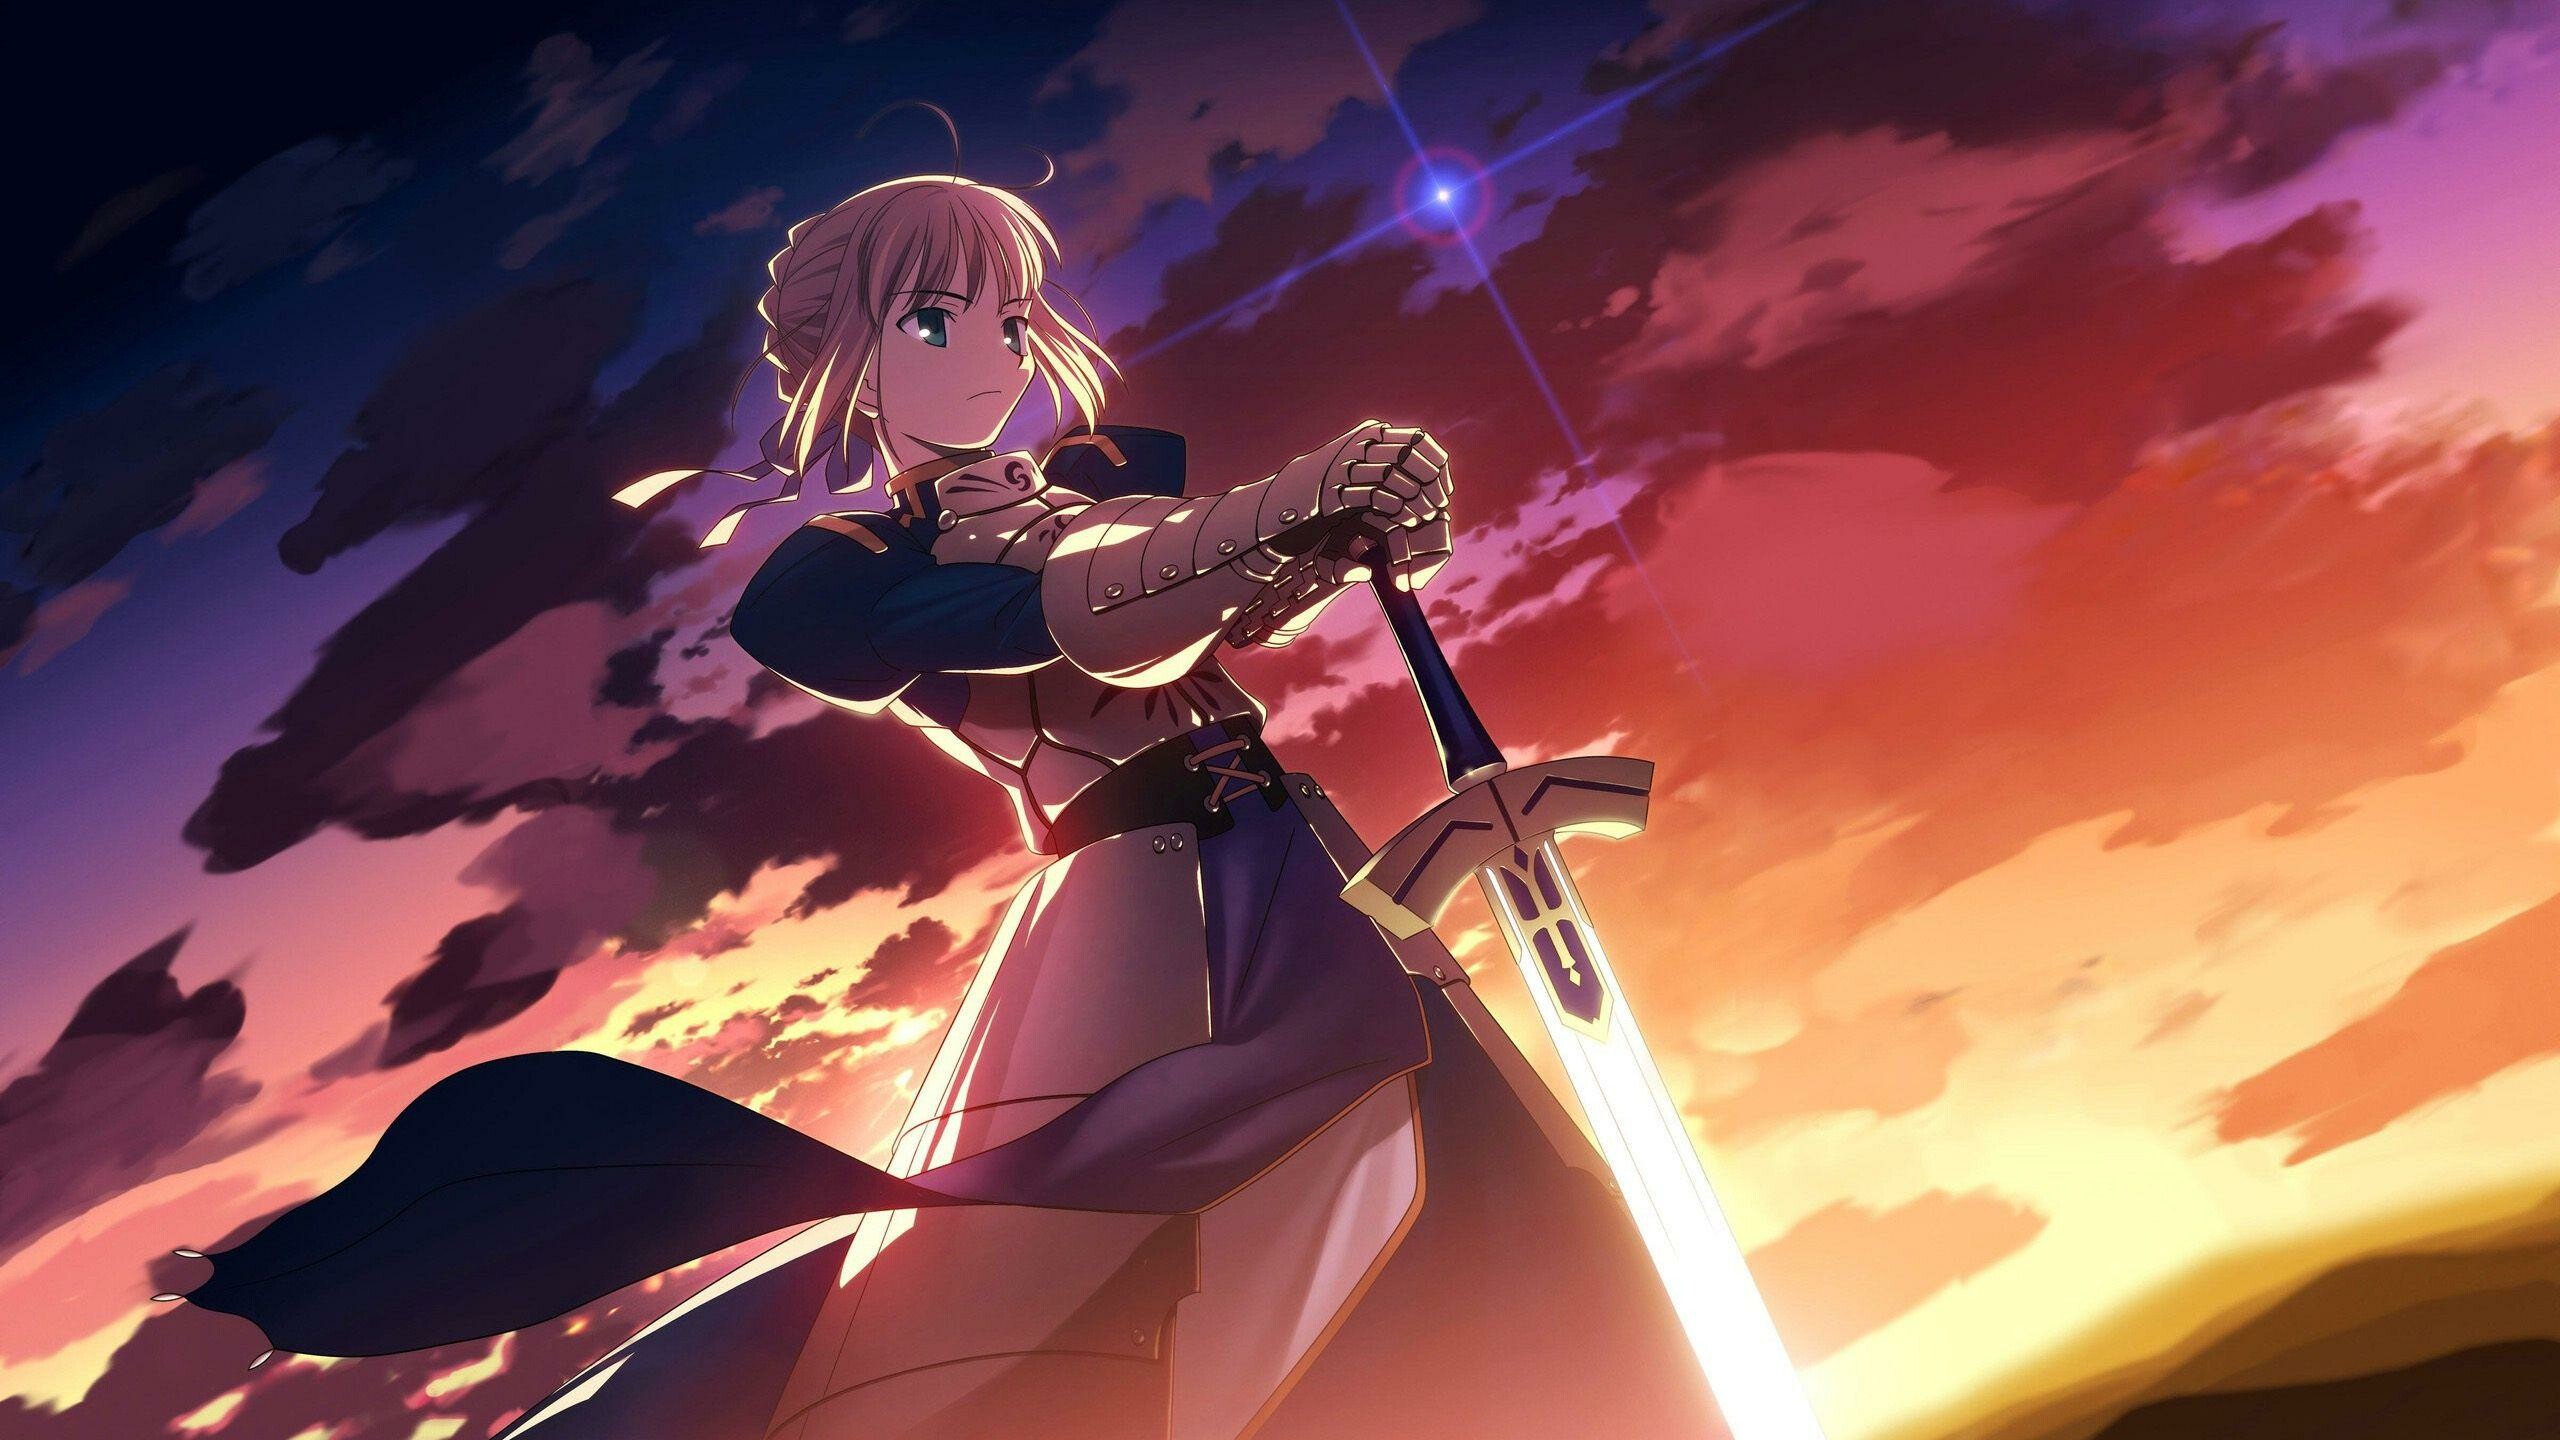 Fate/stay night: Heaven's Feel: Saber, Artoria Pendragon, Сharacter inspired by the legends of King Arthur. 2560x1440 HD Wallpaper.